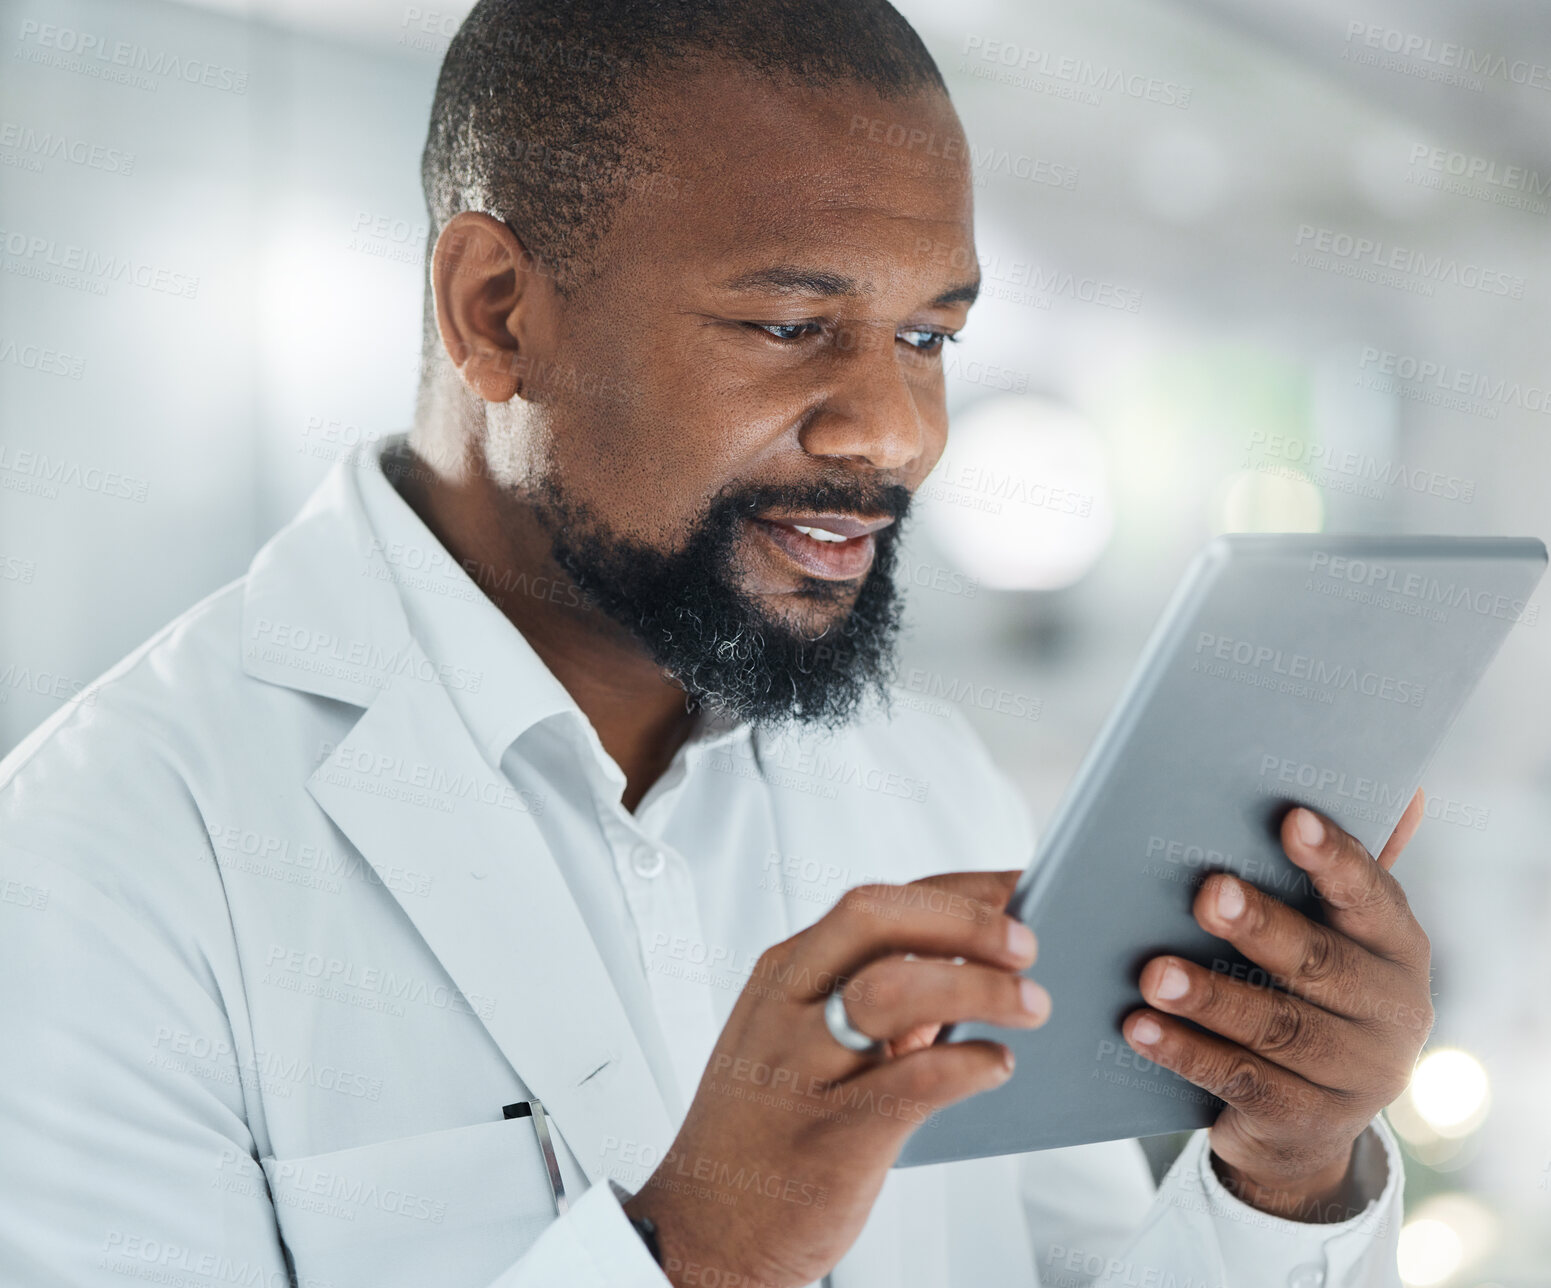 Buy stock photo Shot of a male scientist using a digital tablet while working in a lab